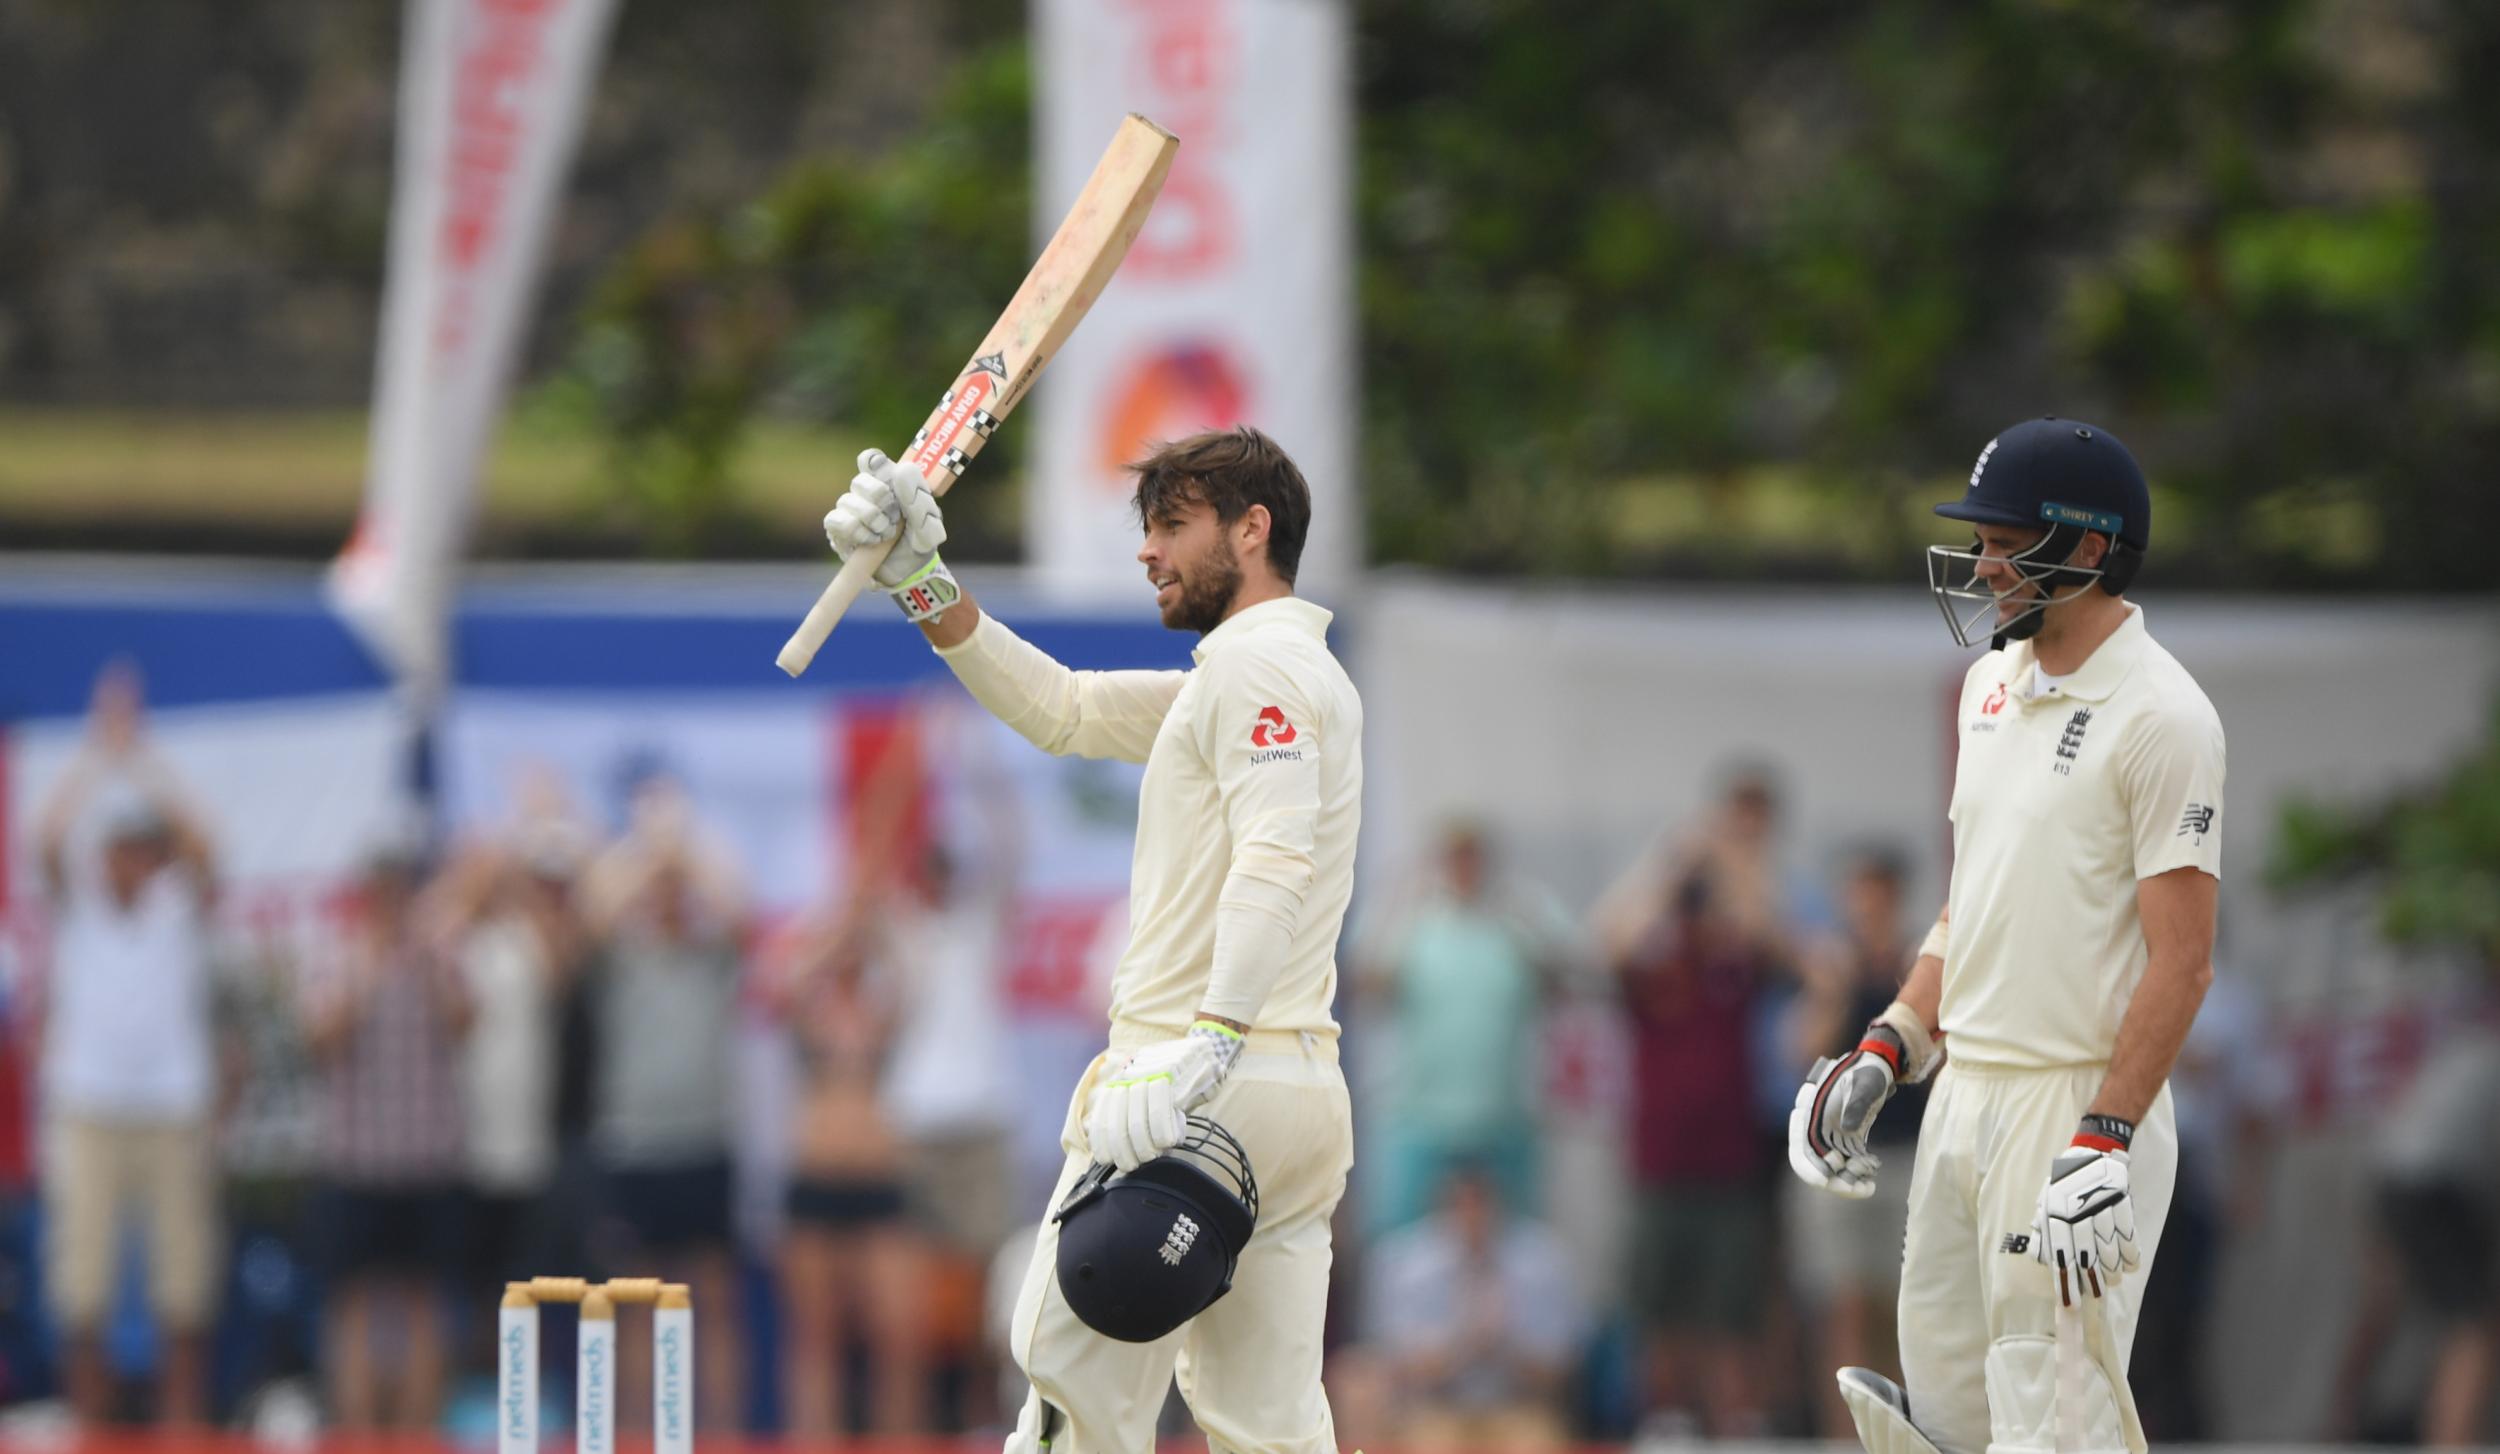 Ben Foakes' century saved England's first innings and put them in the driving seat